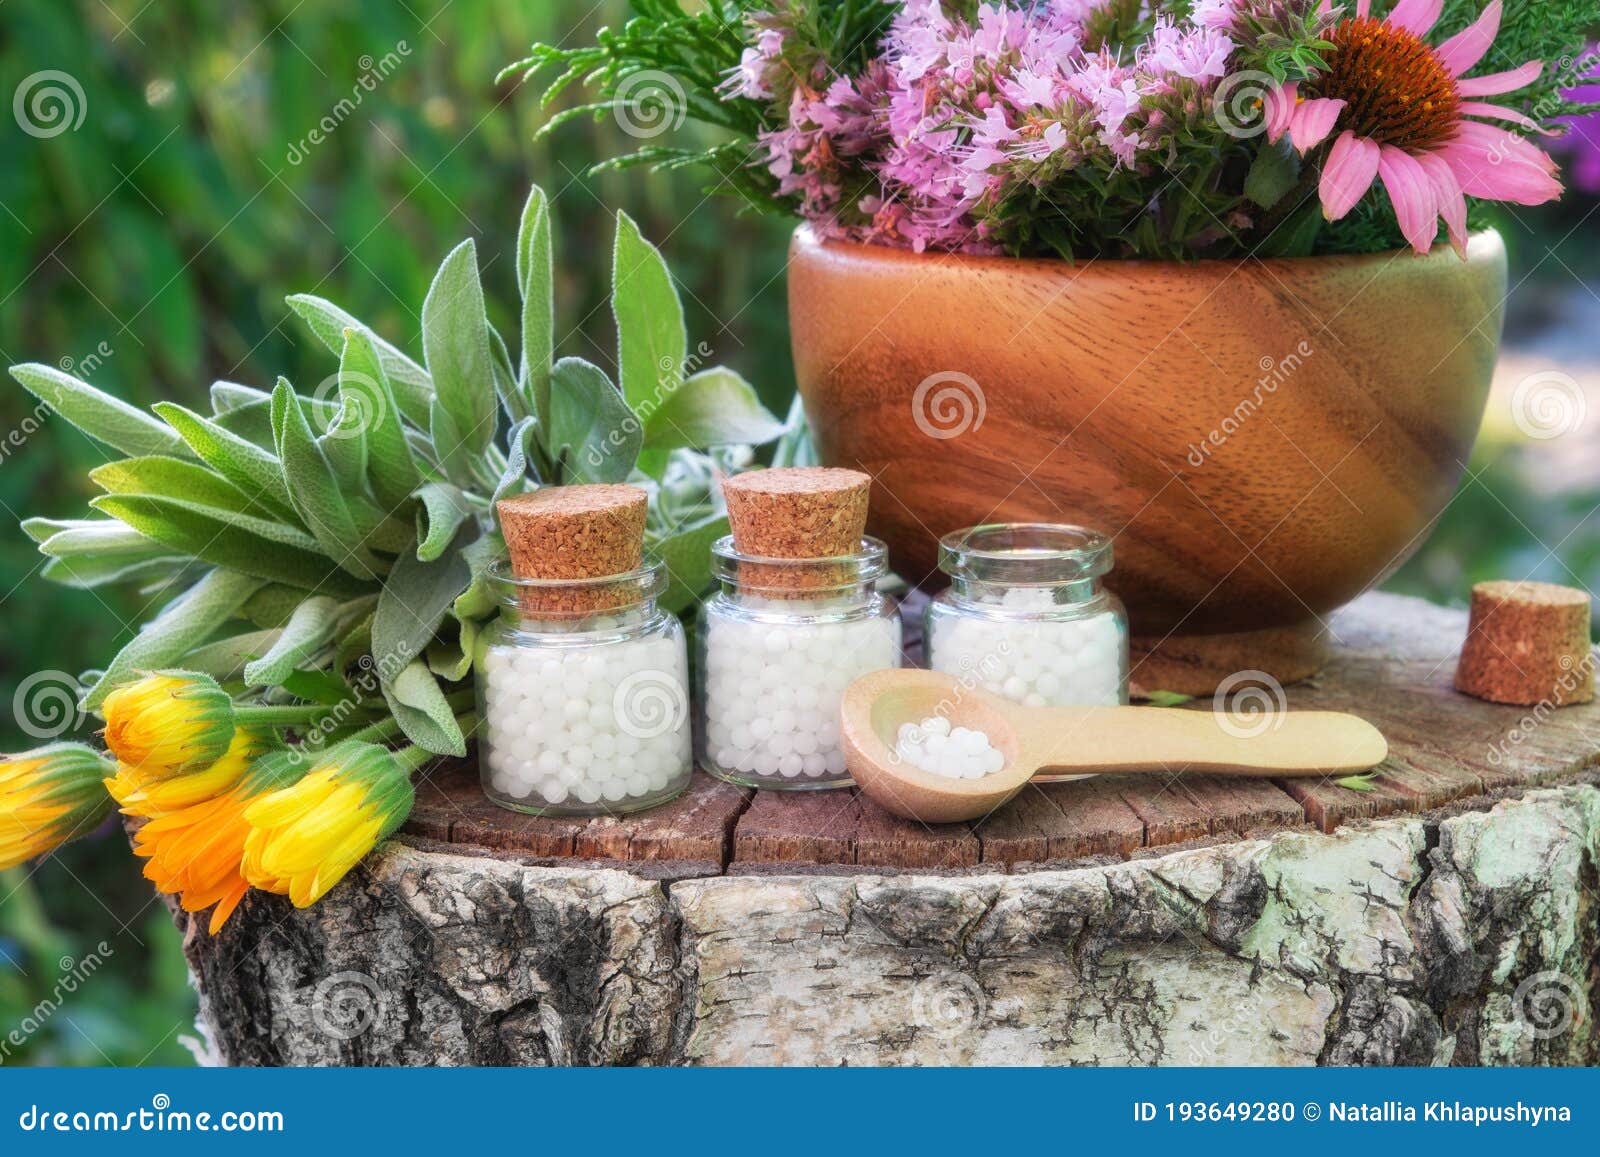 bottles of homeopathic globules, wooden mortar of medicinal herbs, healing plants on stump outdoors